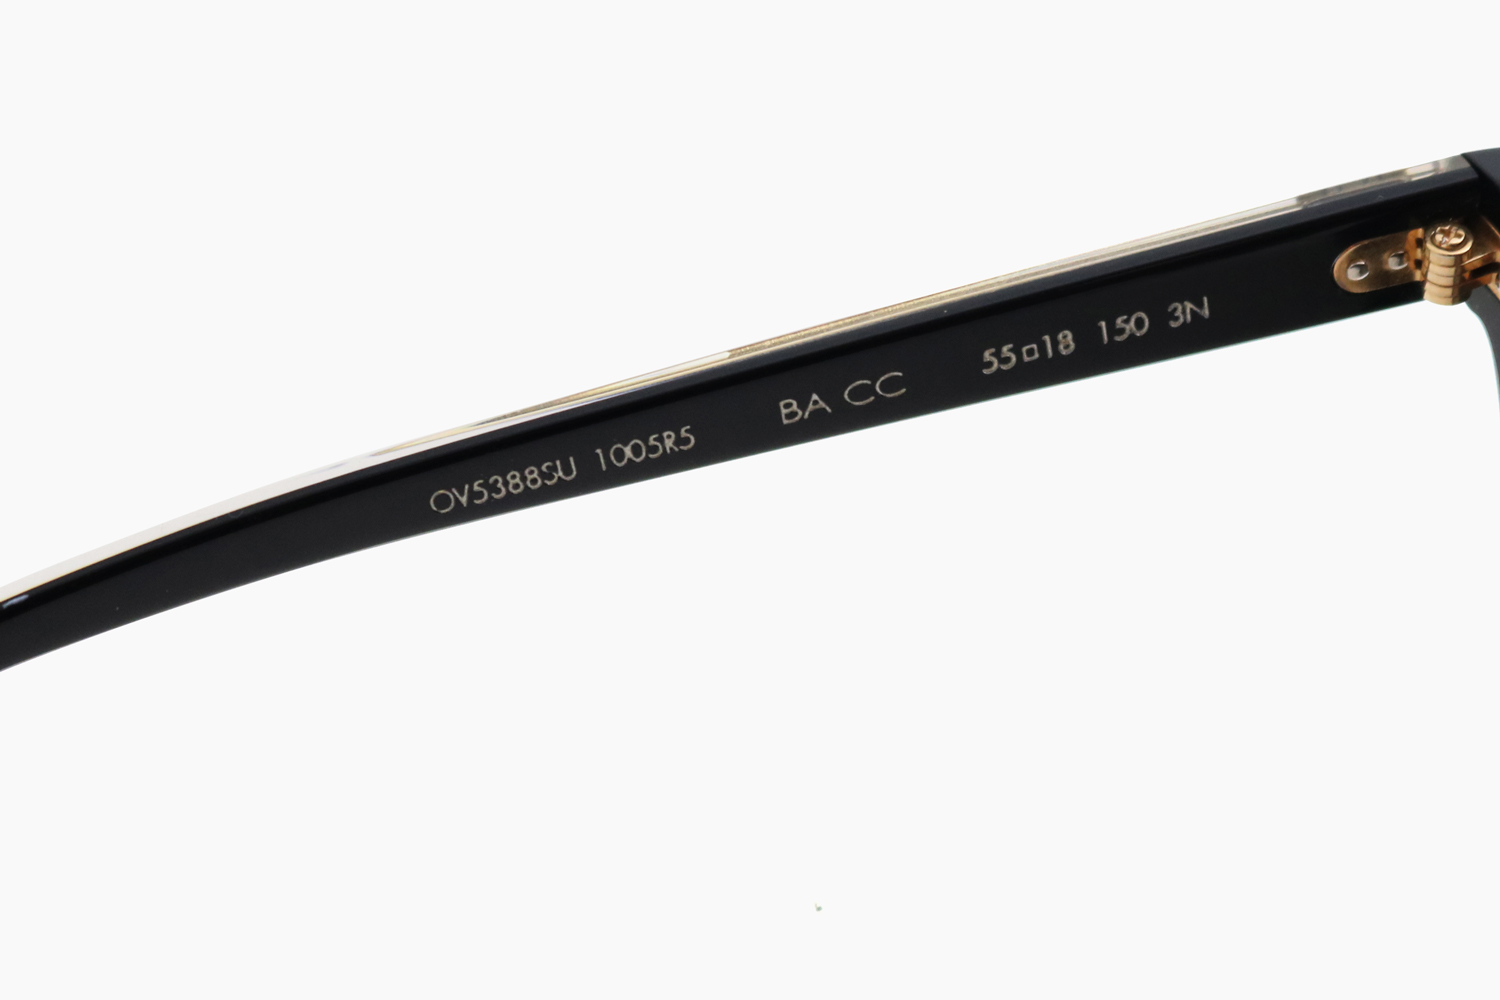 OLIVER PEOPLES THE ROW｜BA CC 53885SU - 1005R5｜OLIVER PEOPLES